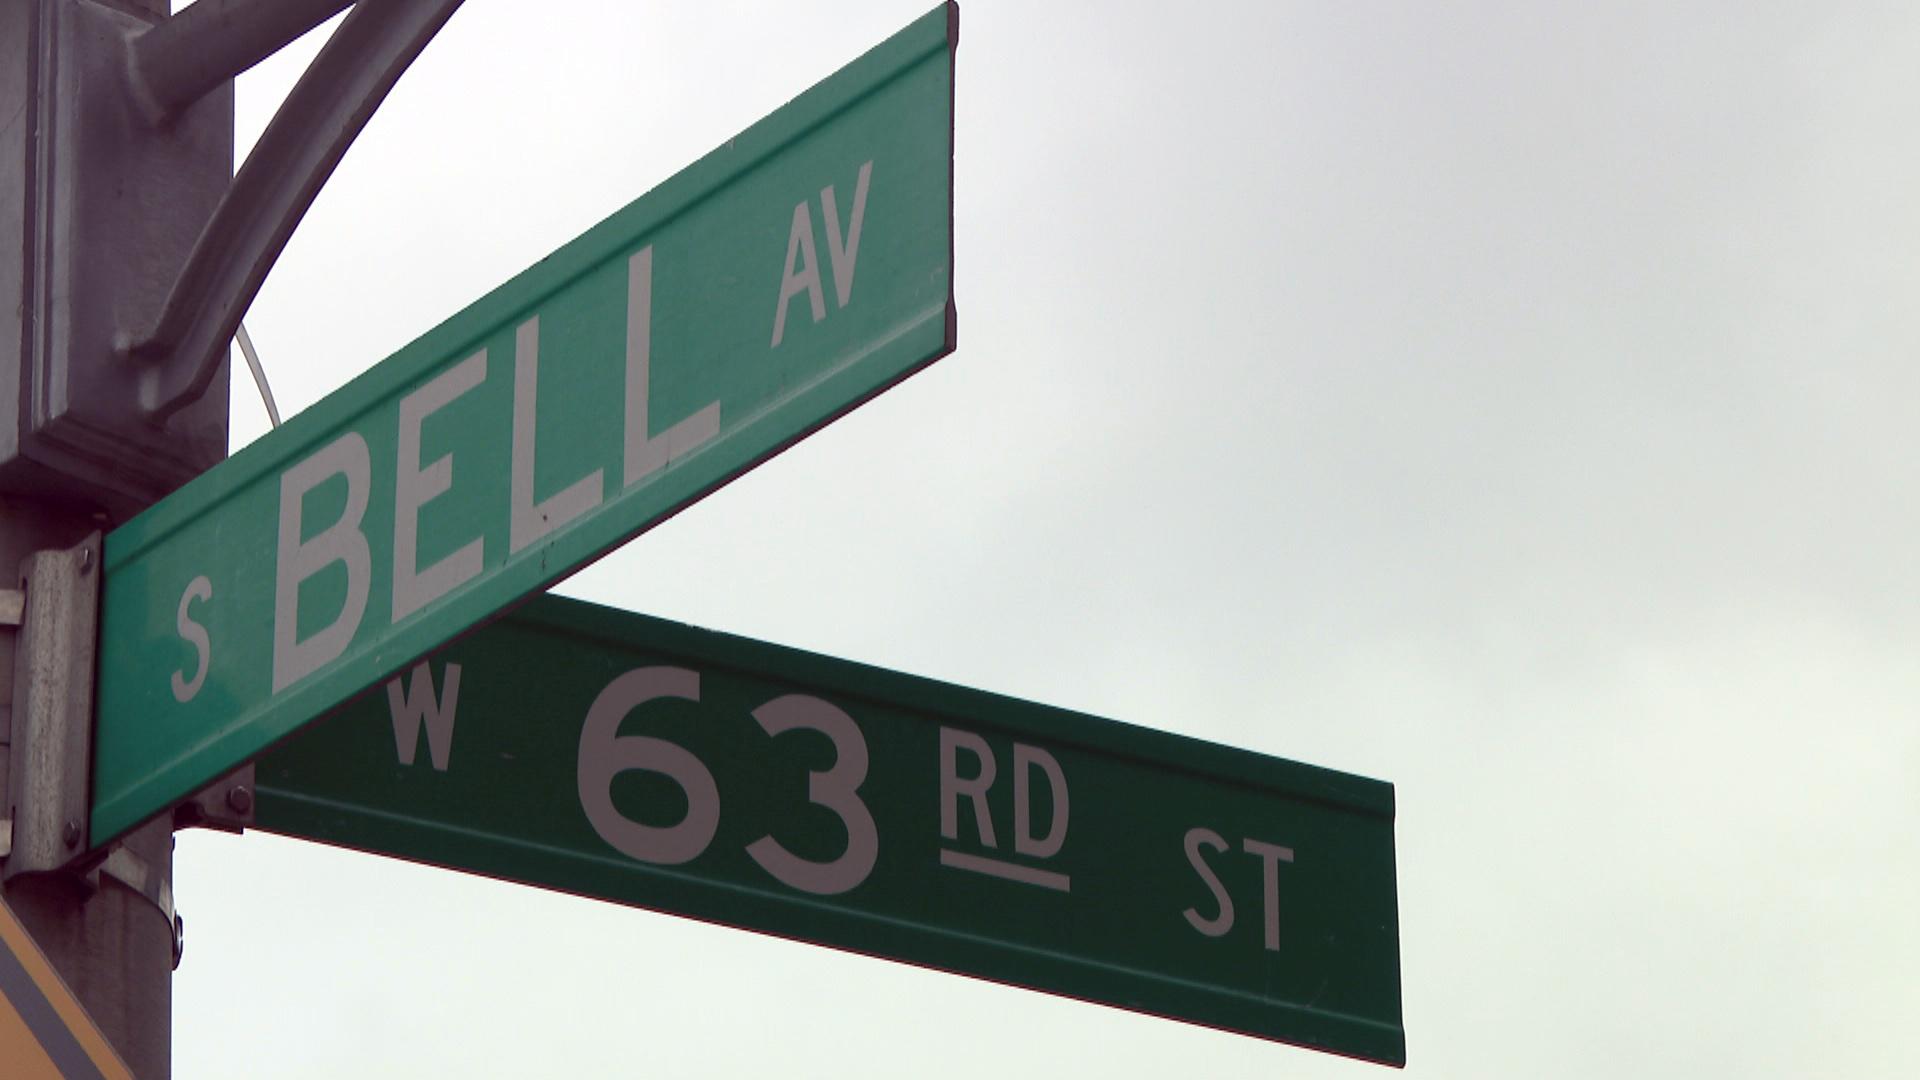 The intersection of 63rd Street and South Bell Avenue in Chicago. (WTTW News)